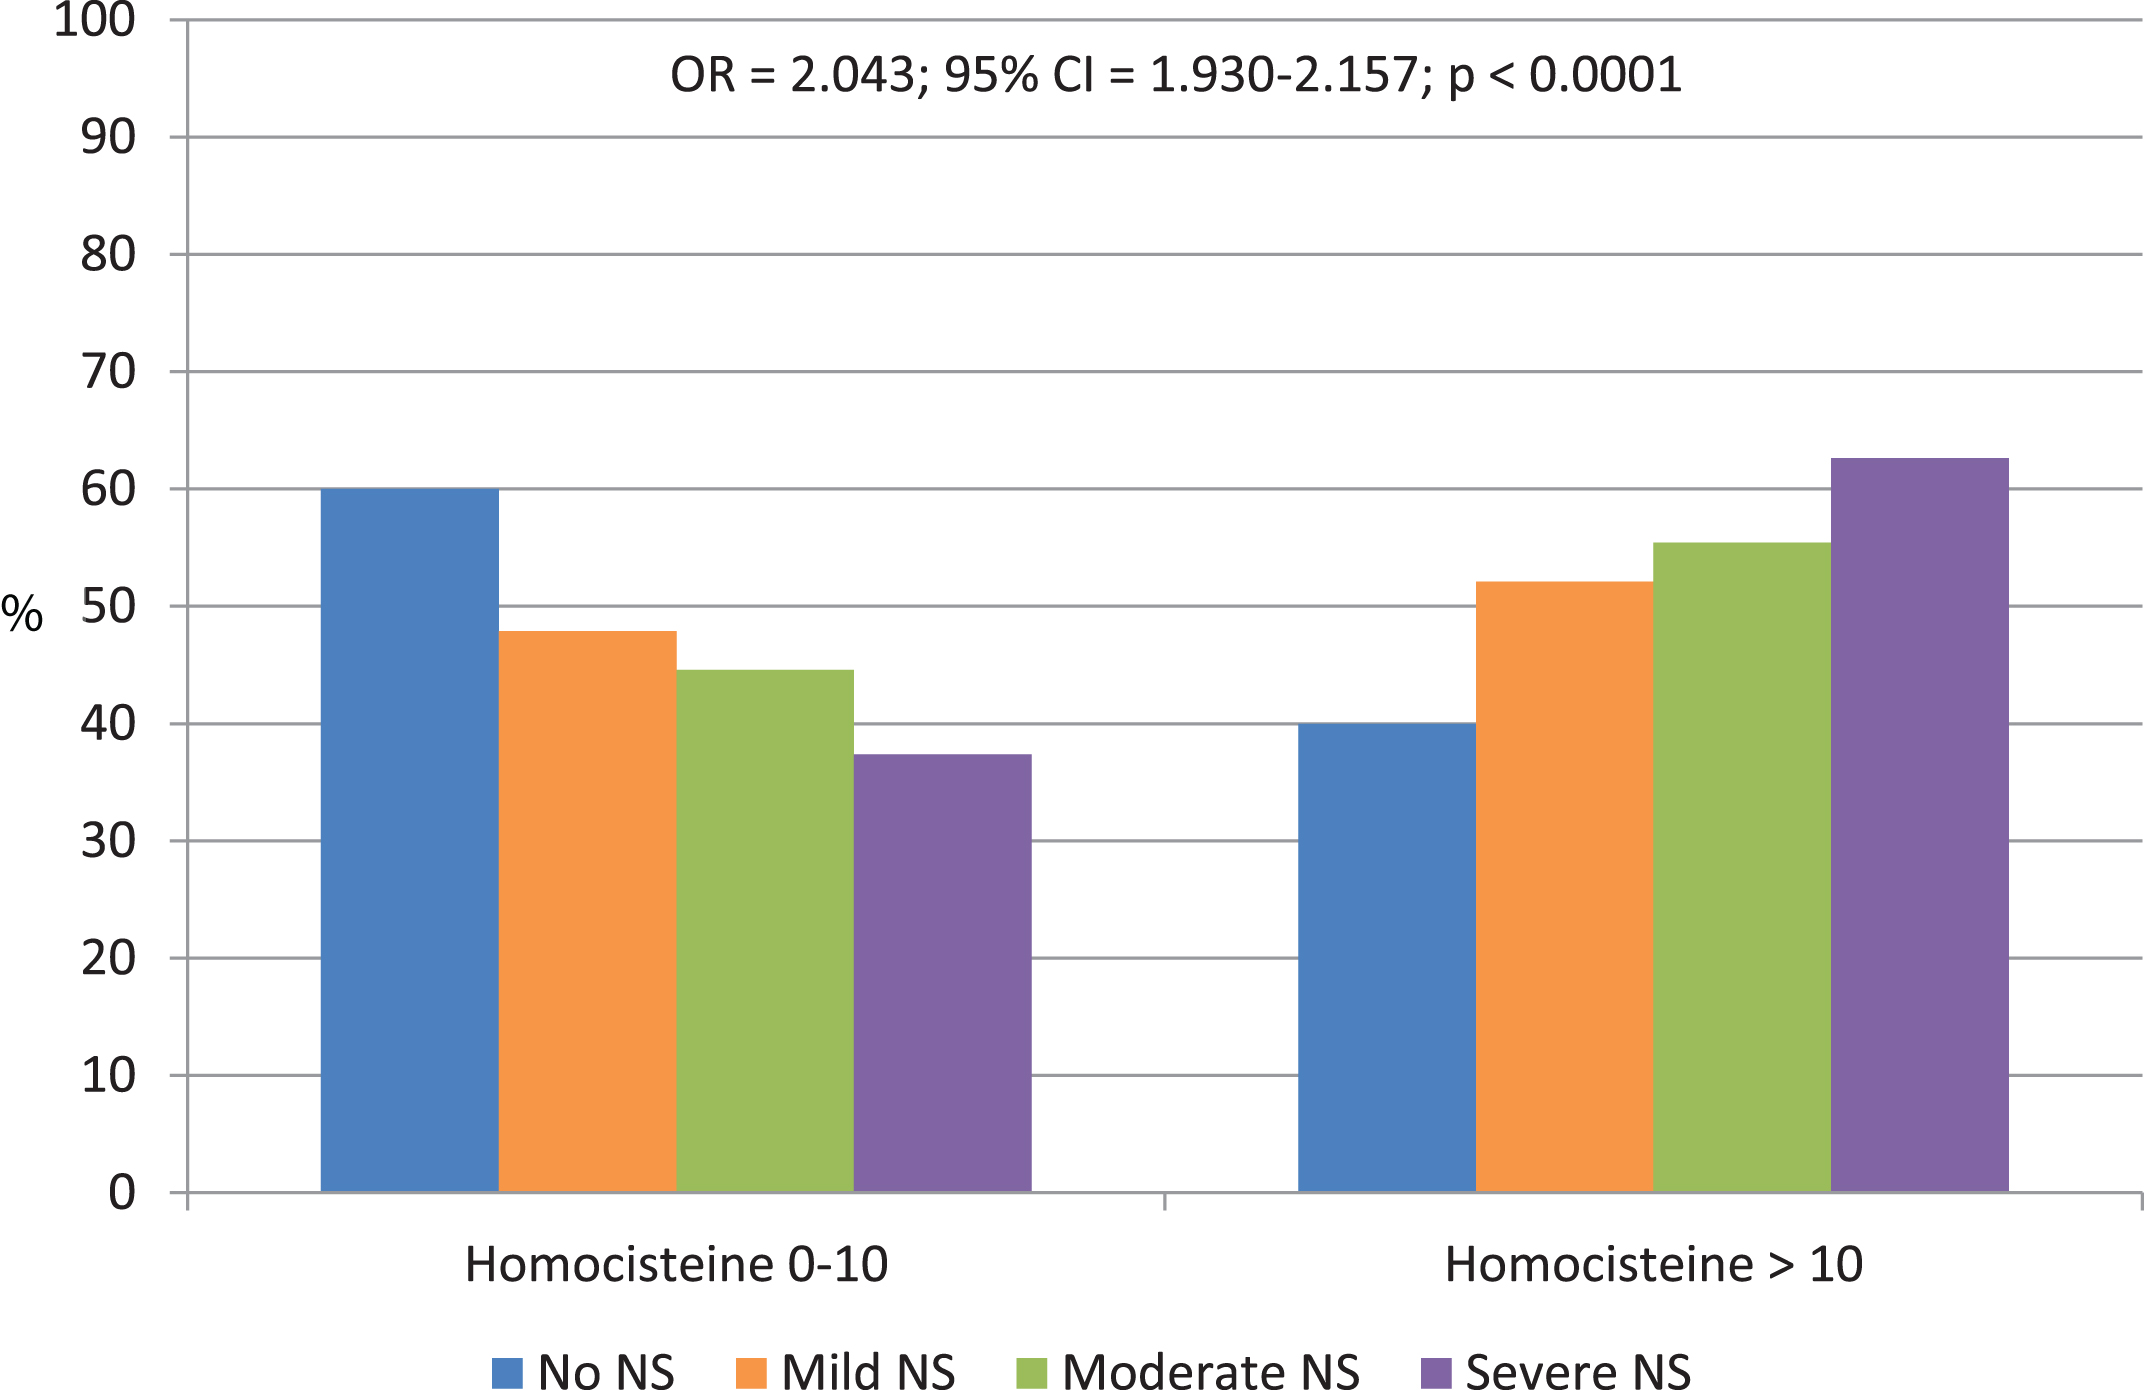 Distribution of homocysteine levels according to the neuropsychiatric symptom (NS) severity evaluated by Neuropsychiatric Inventory (NPI).